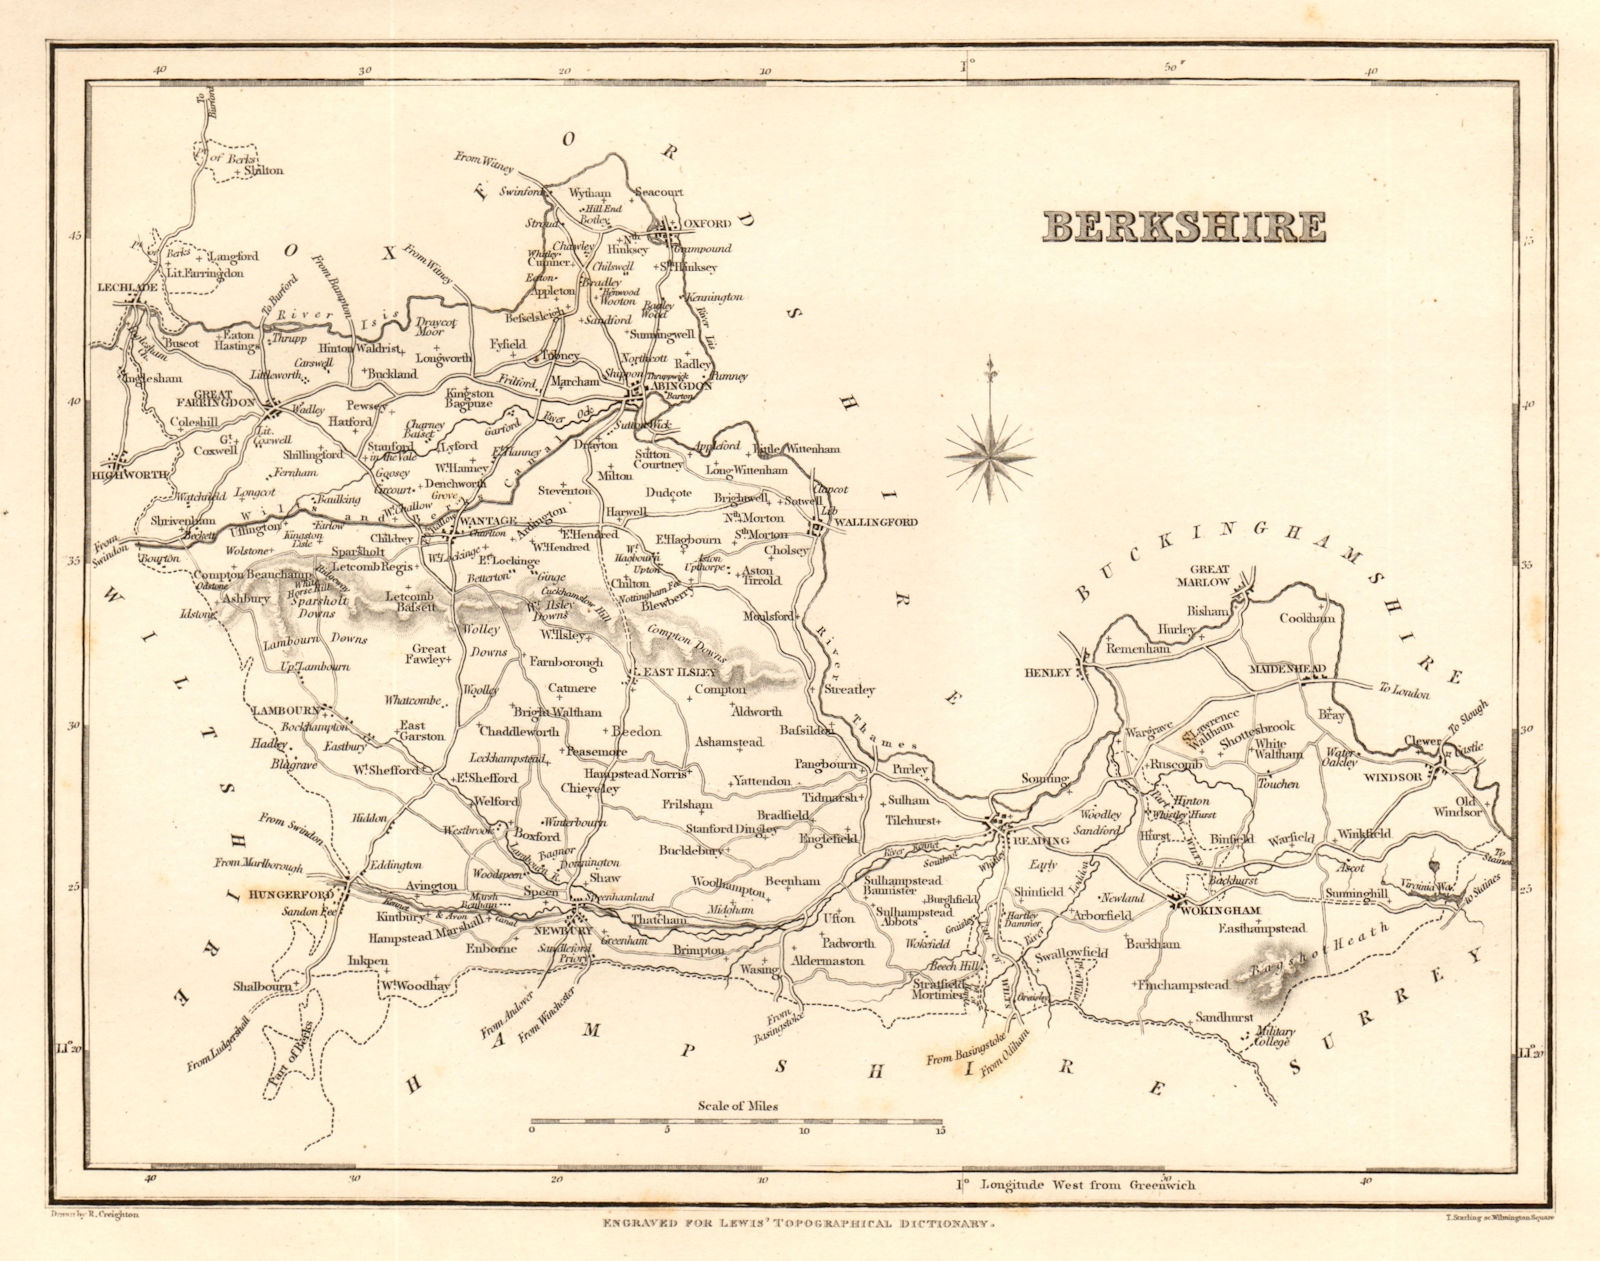 Associate Product Antique county map of BERKSHIRE by Starling & Creighton for Lewis c1840